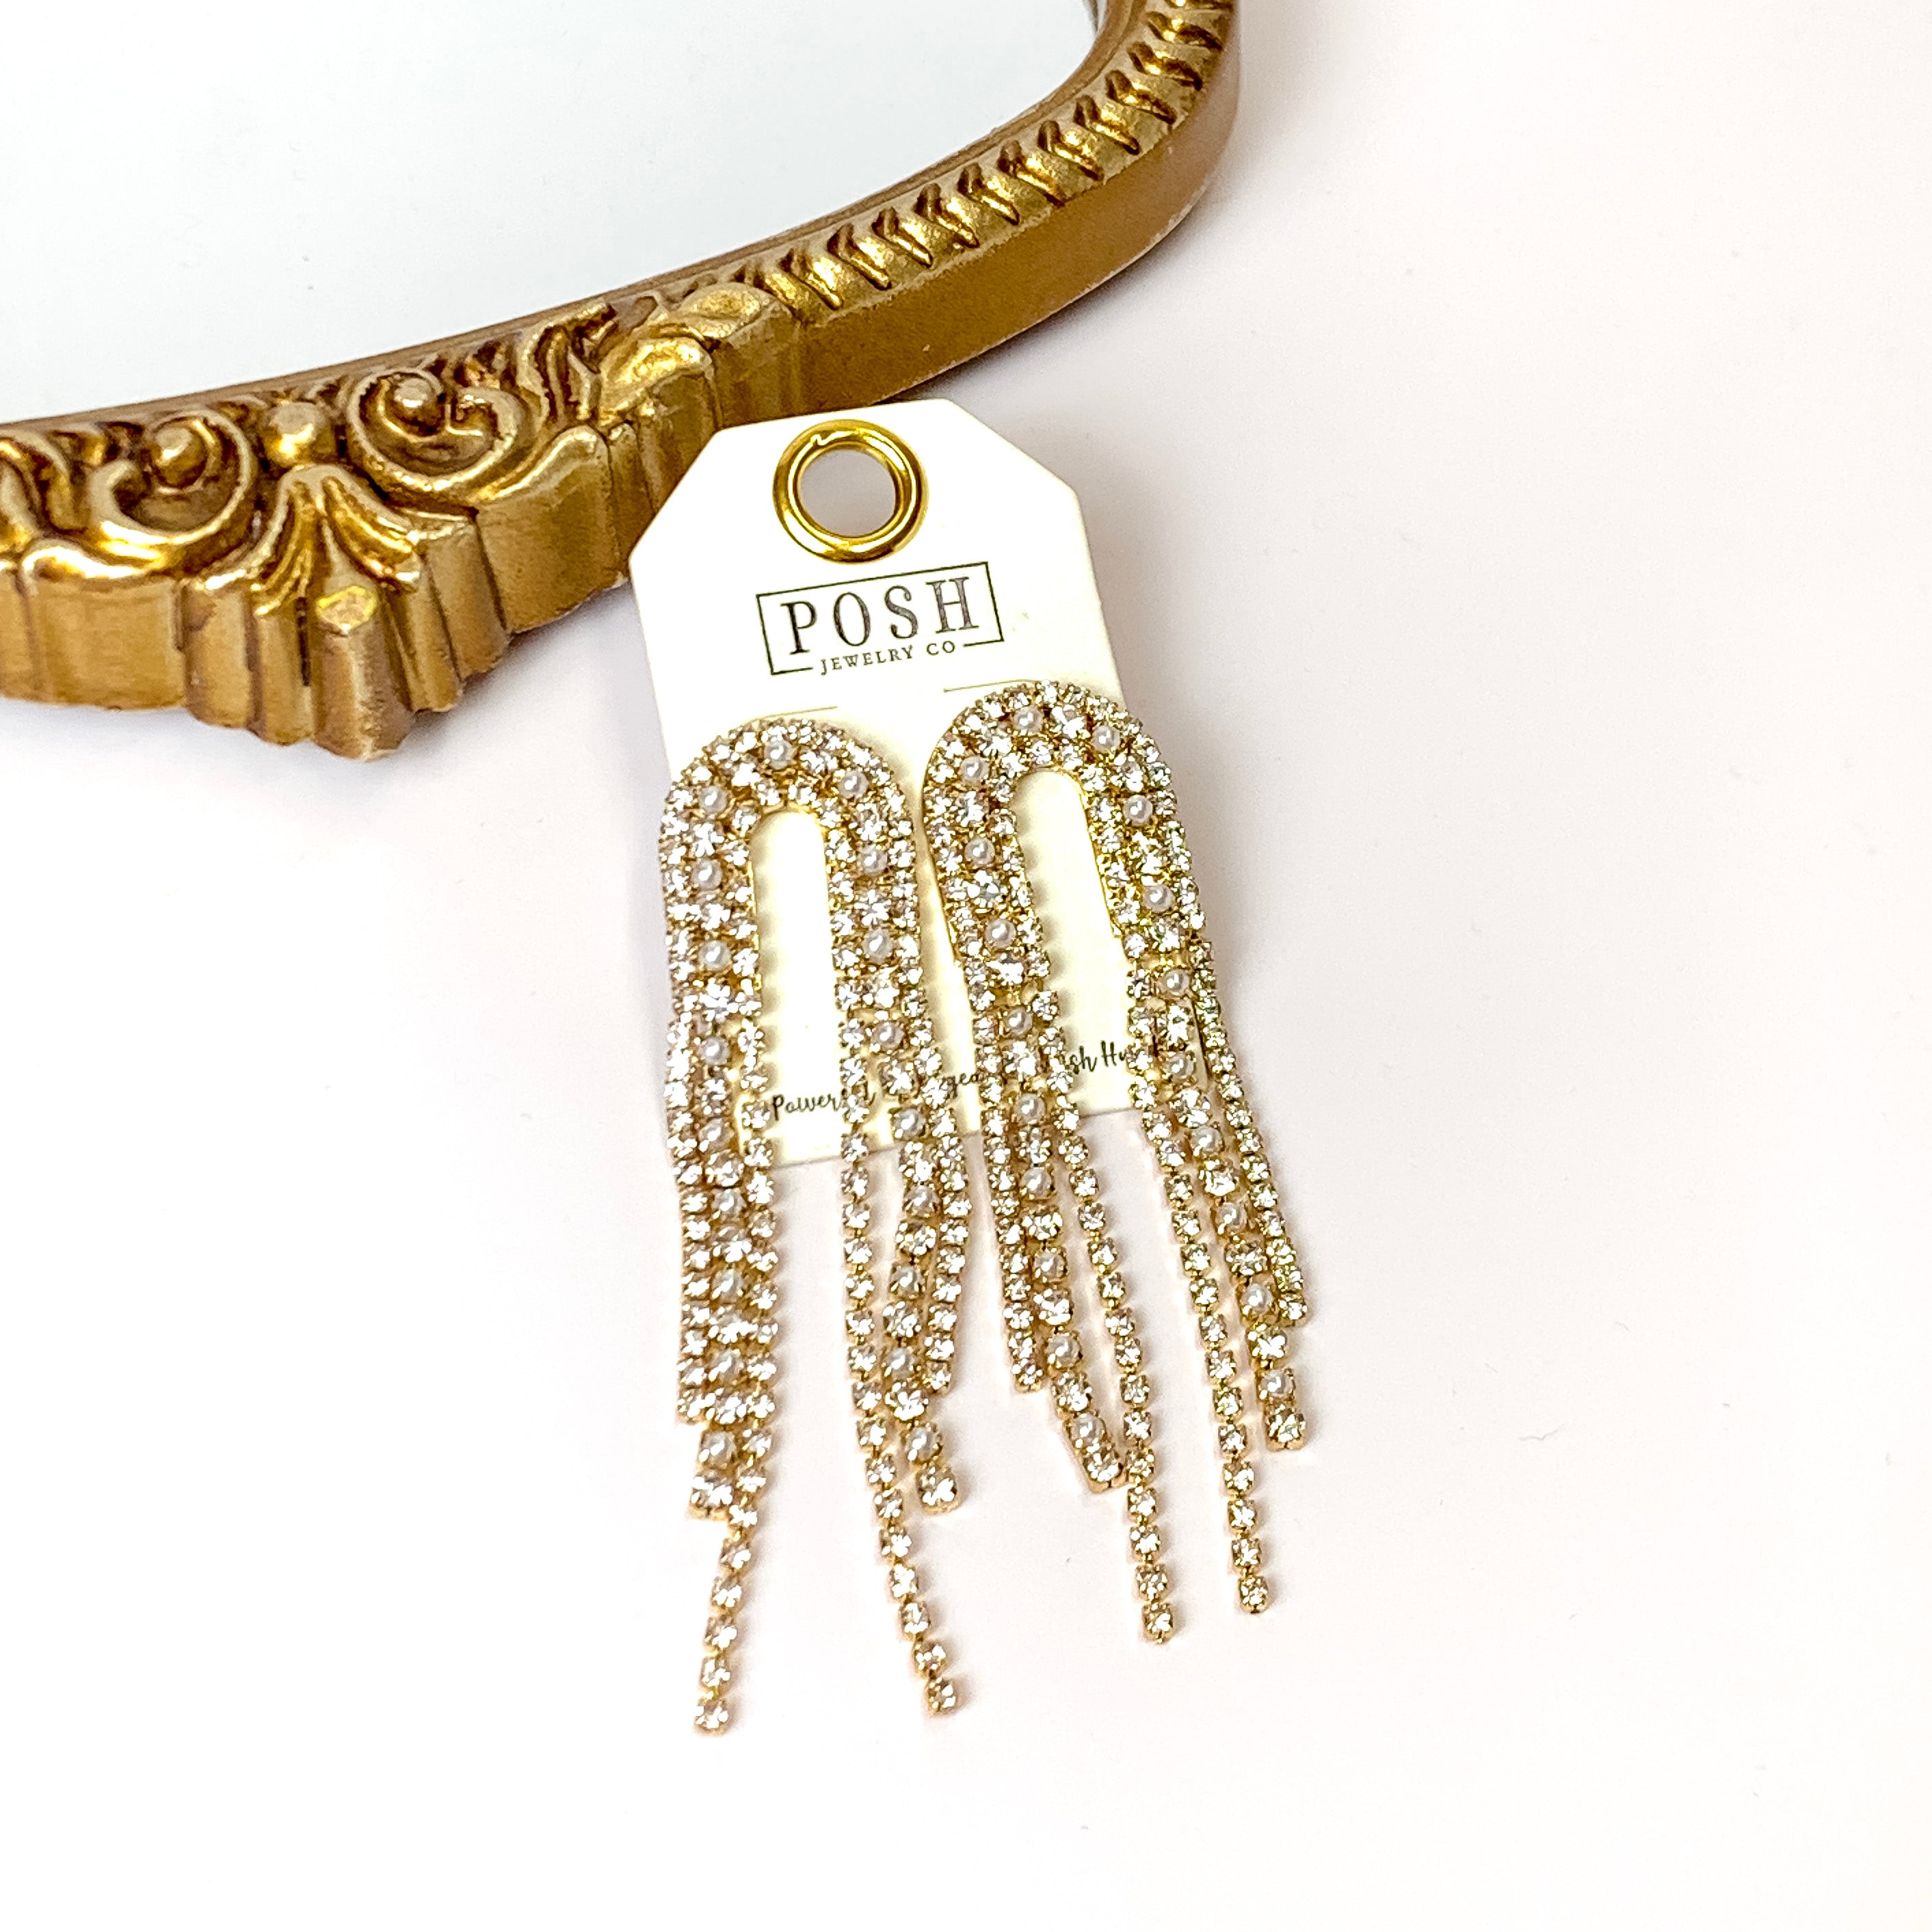 Posh By Pink Panache | Arched Fringe Earrings with Pearl Accents in Gold Tone - Giddy Up Glamour Boutique